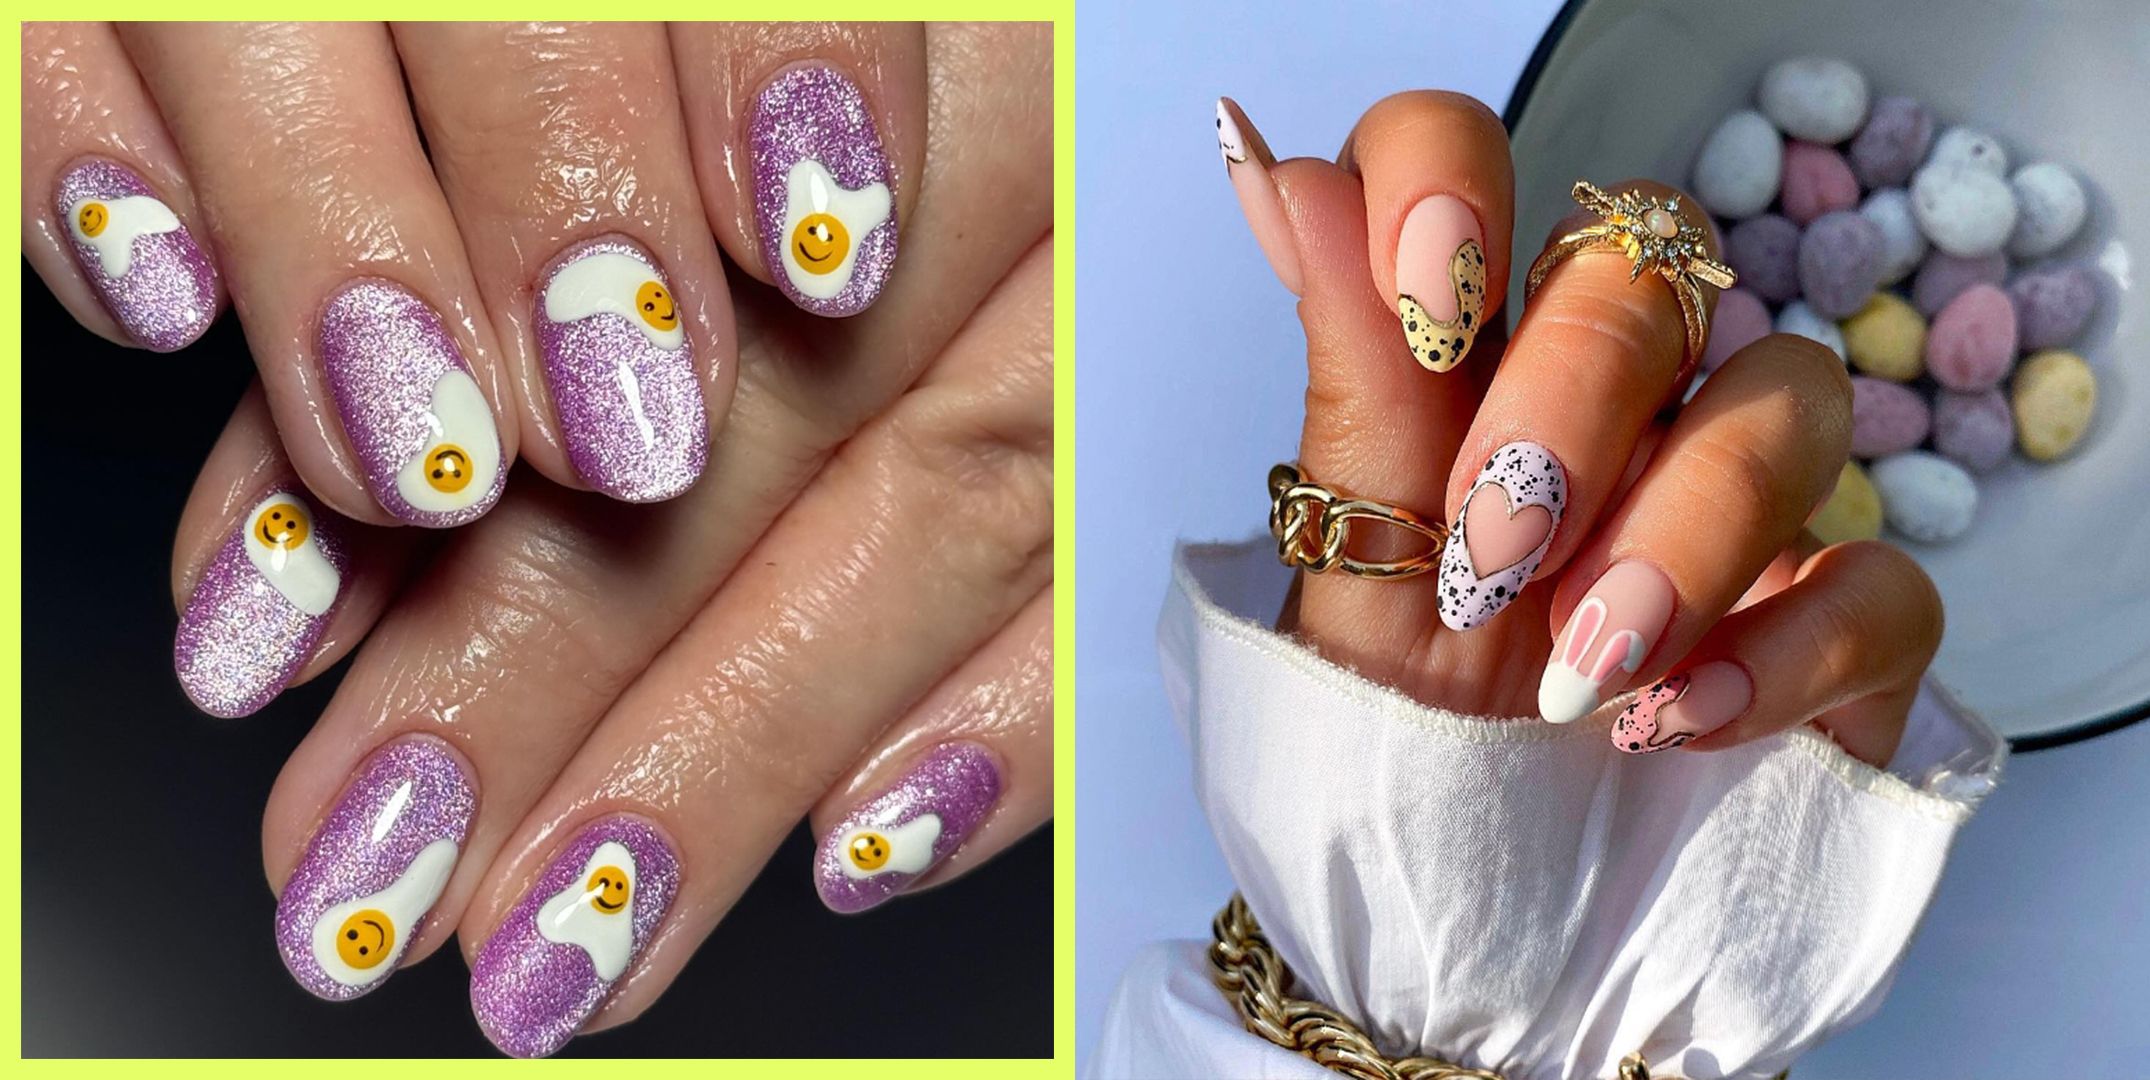 Nail Art Inspiration: Featured Artist @decorateddigits – Daily Charme